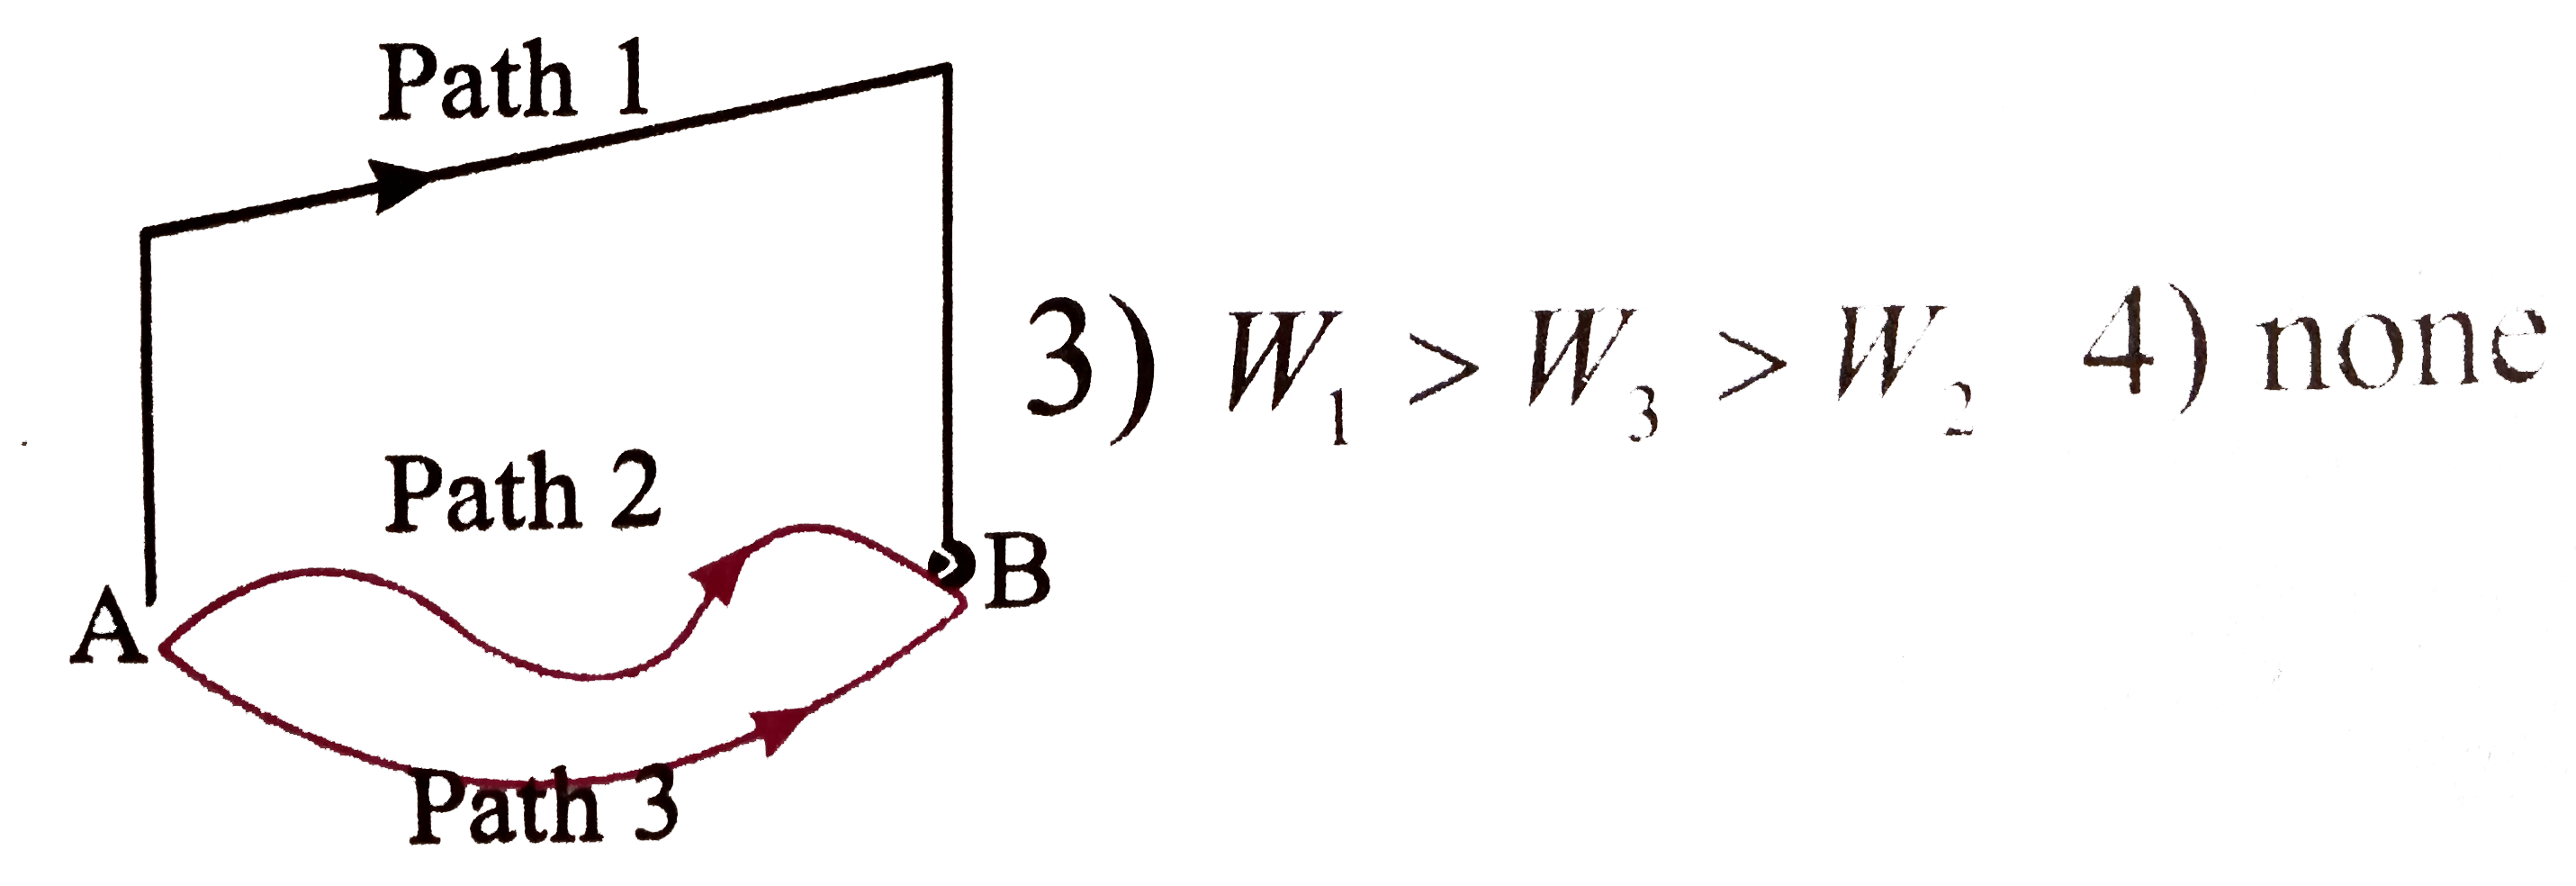 A gravitational field is present in a region. A point mass is shifted from A to B, along different paths shown in the figure. If W1, W2 and W3 represent the work done by gravitational force for respective paths, then